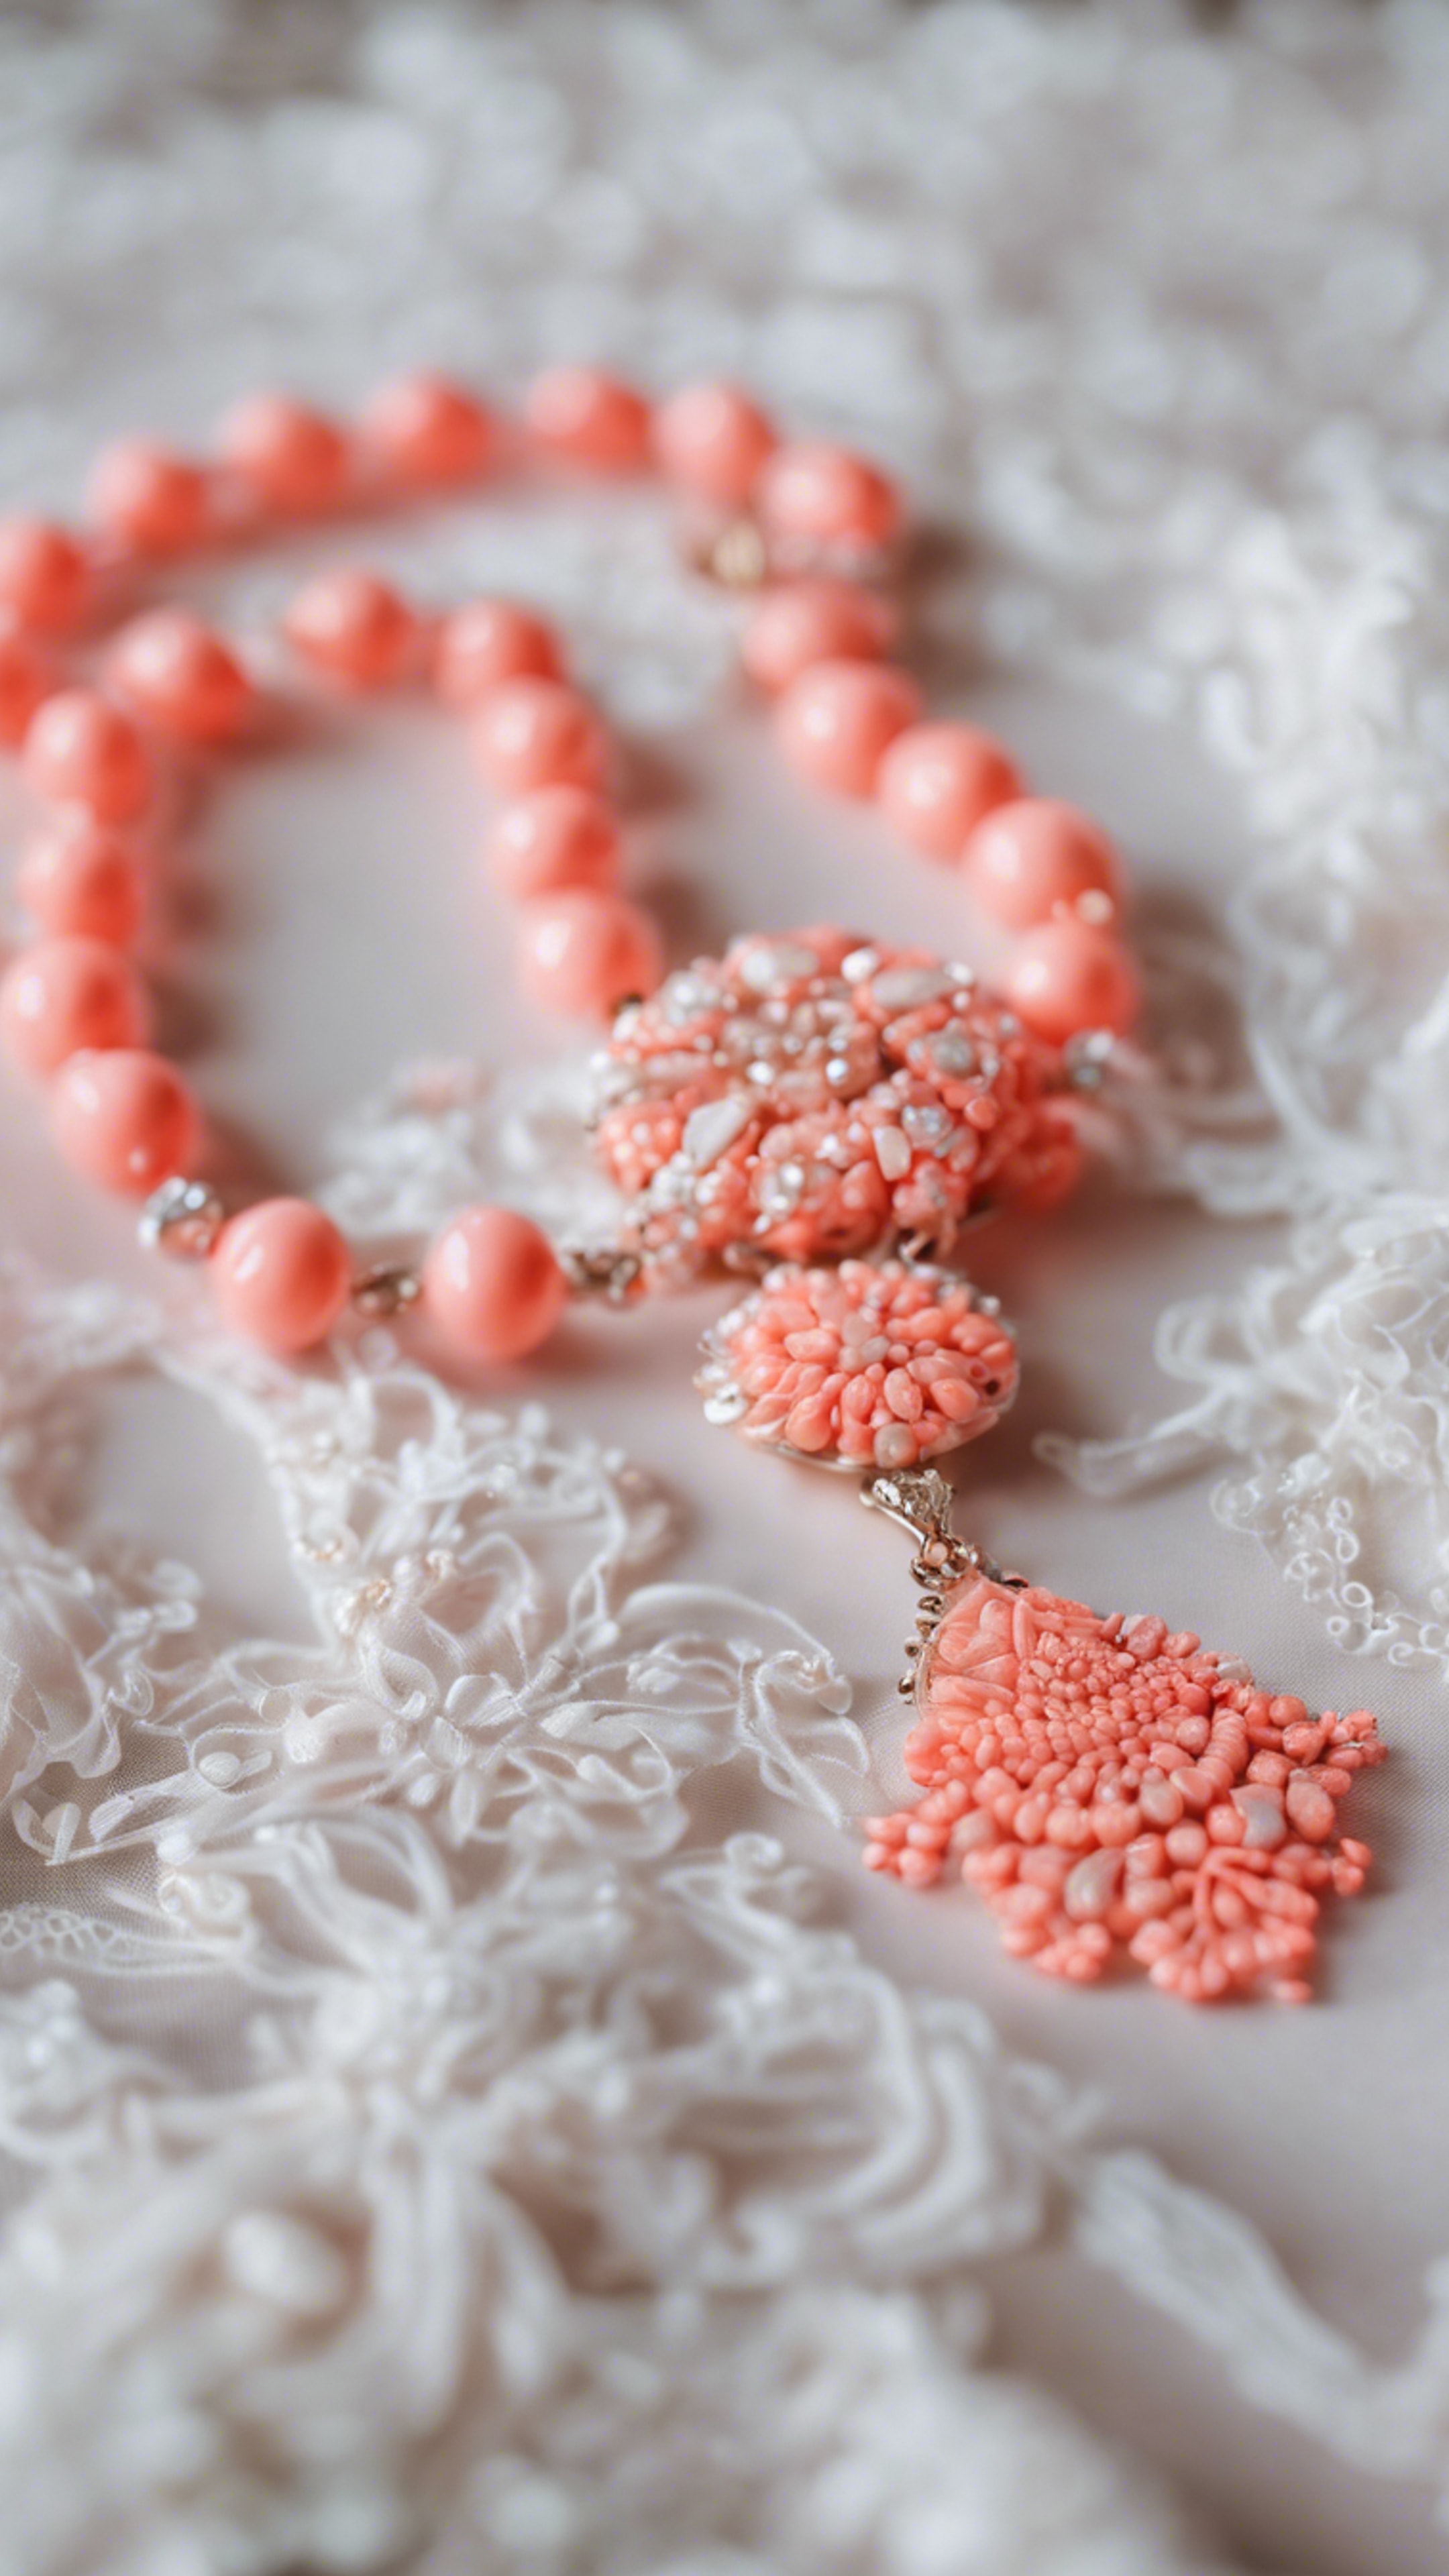 A preppy neon coral necklace against a white lace dress. Kertas dinding[7558fb99fbaf41faa5f9]